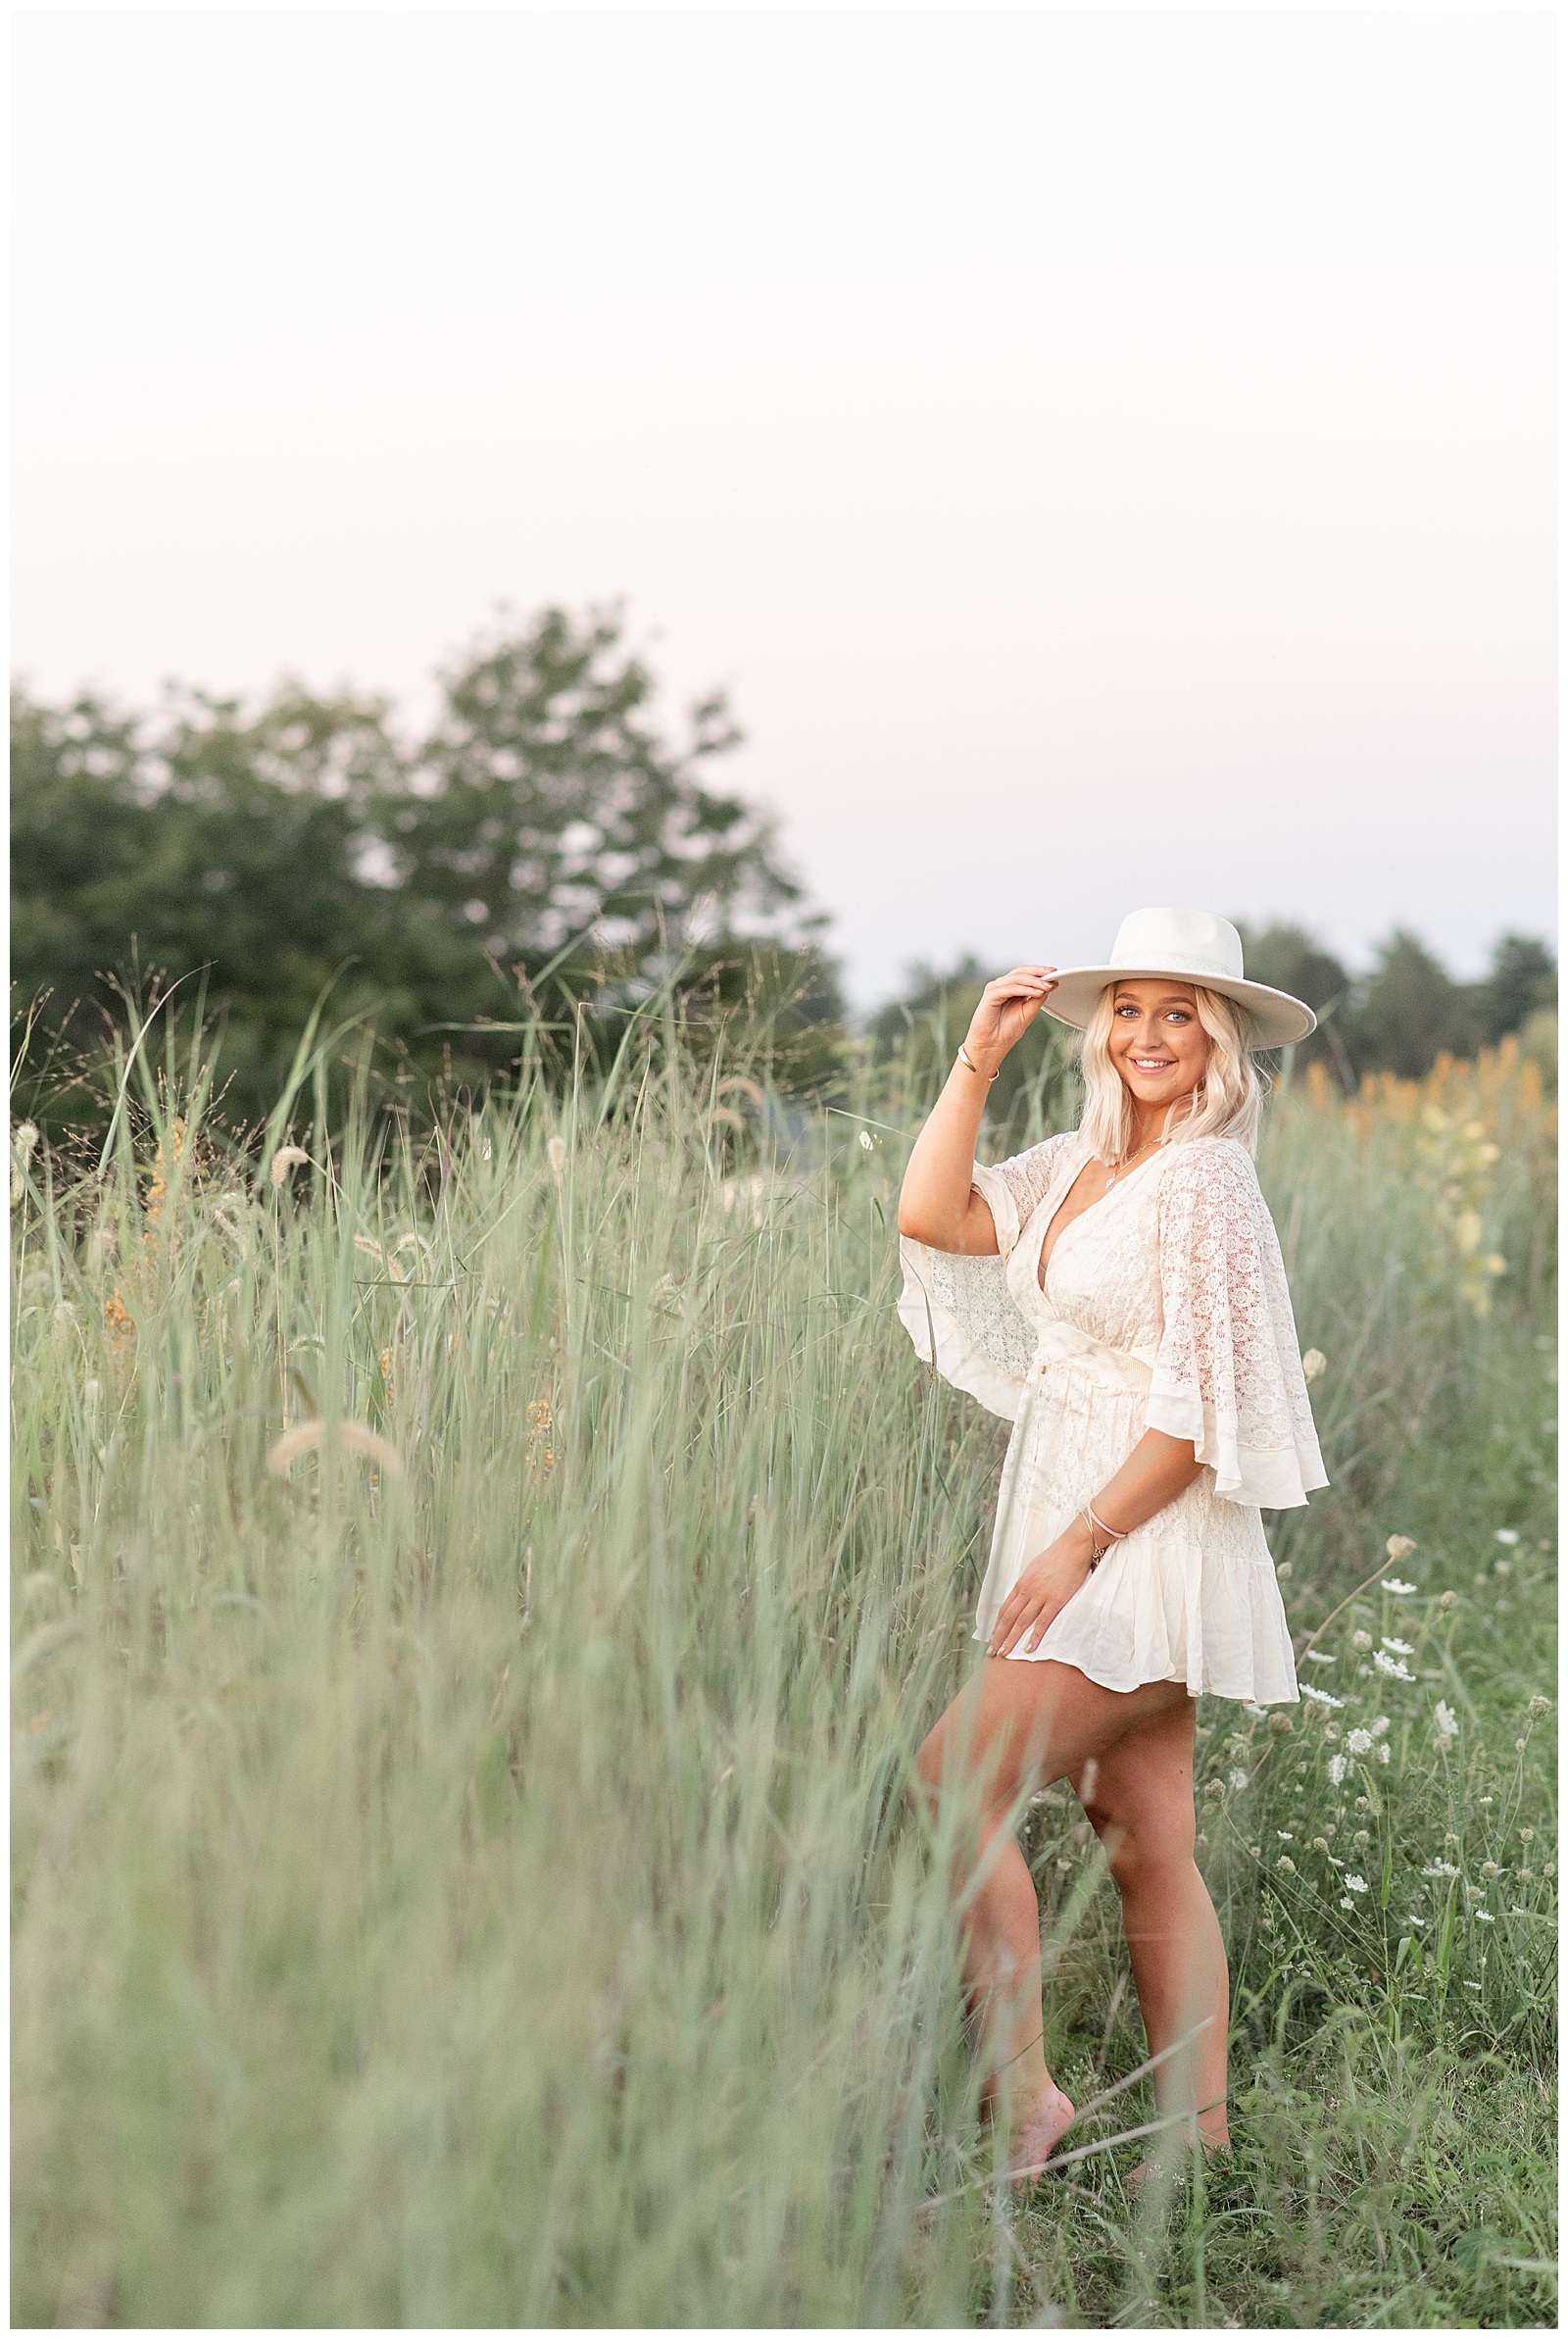 senior girl standing at edge of tall wild grasses with her right hand holding brim of white hat with left shoulder toward camera at overlook park at sunset